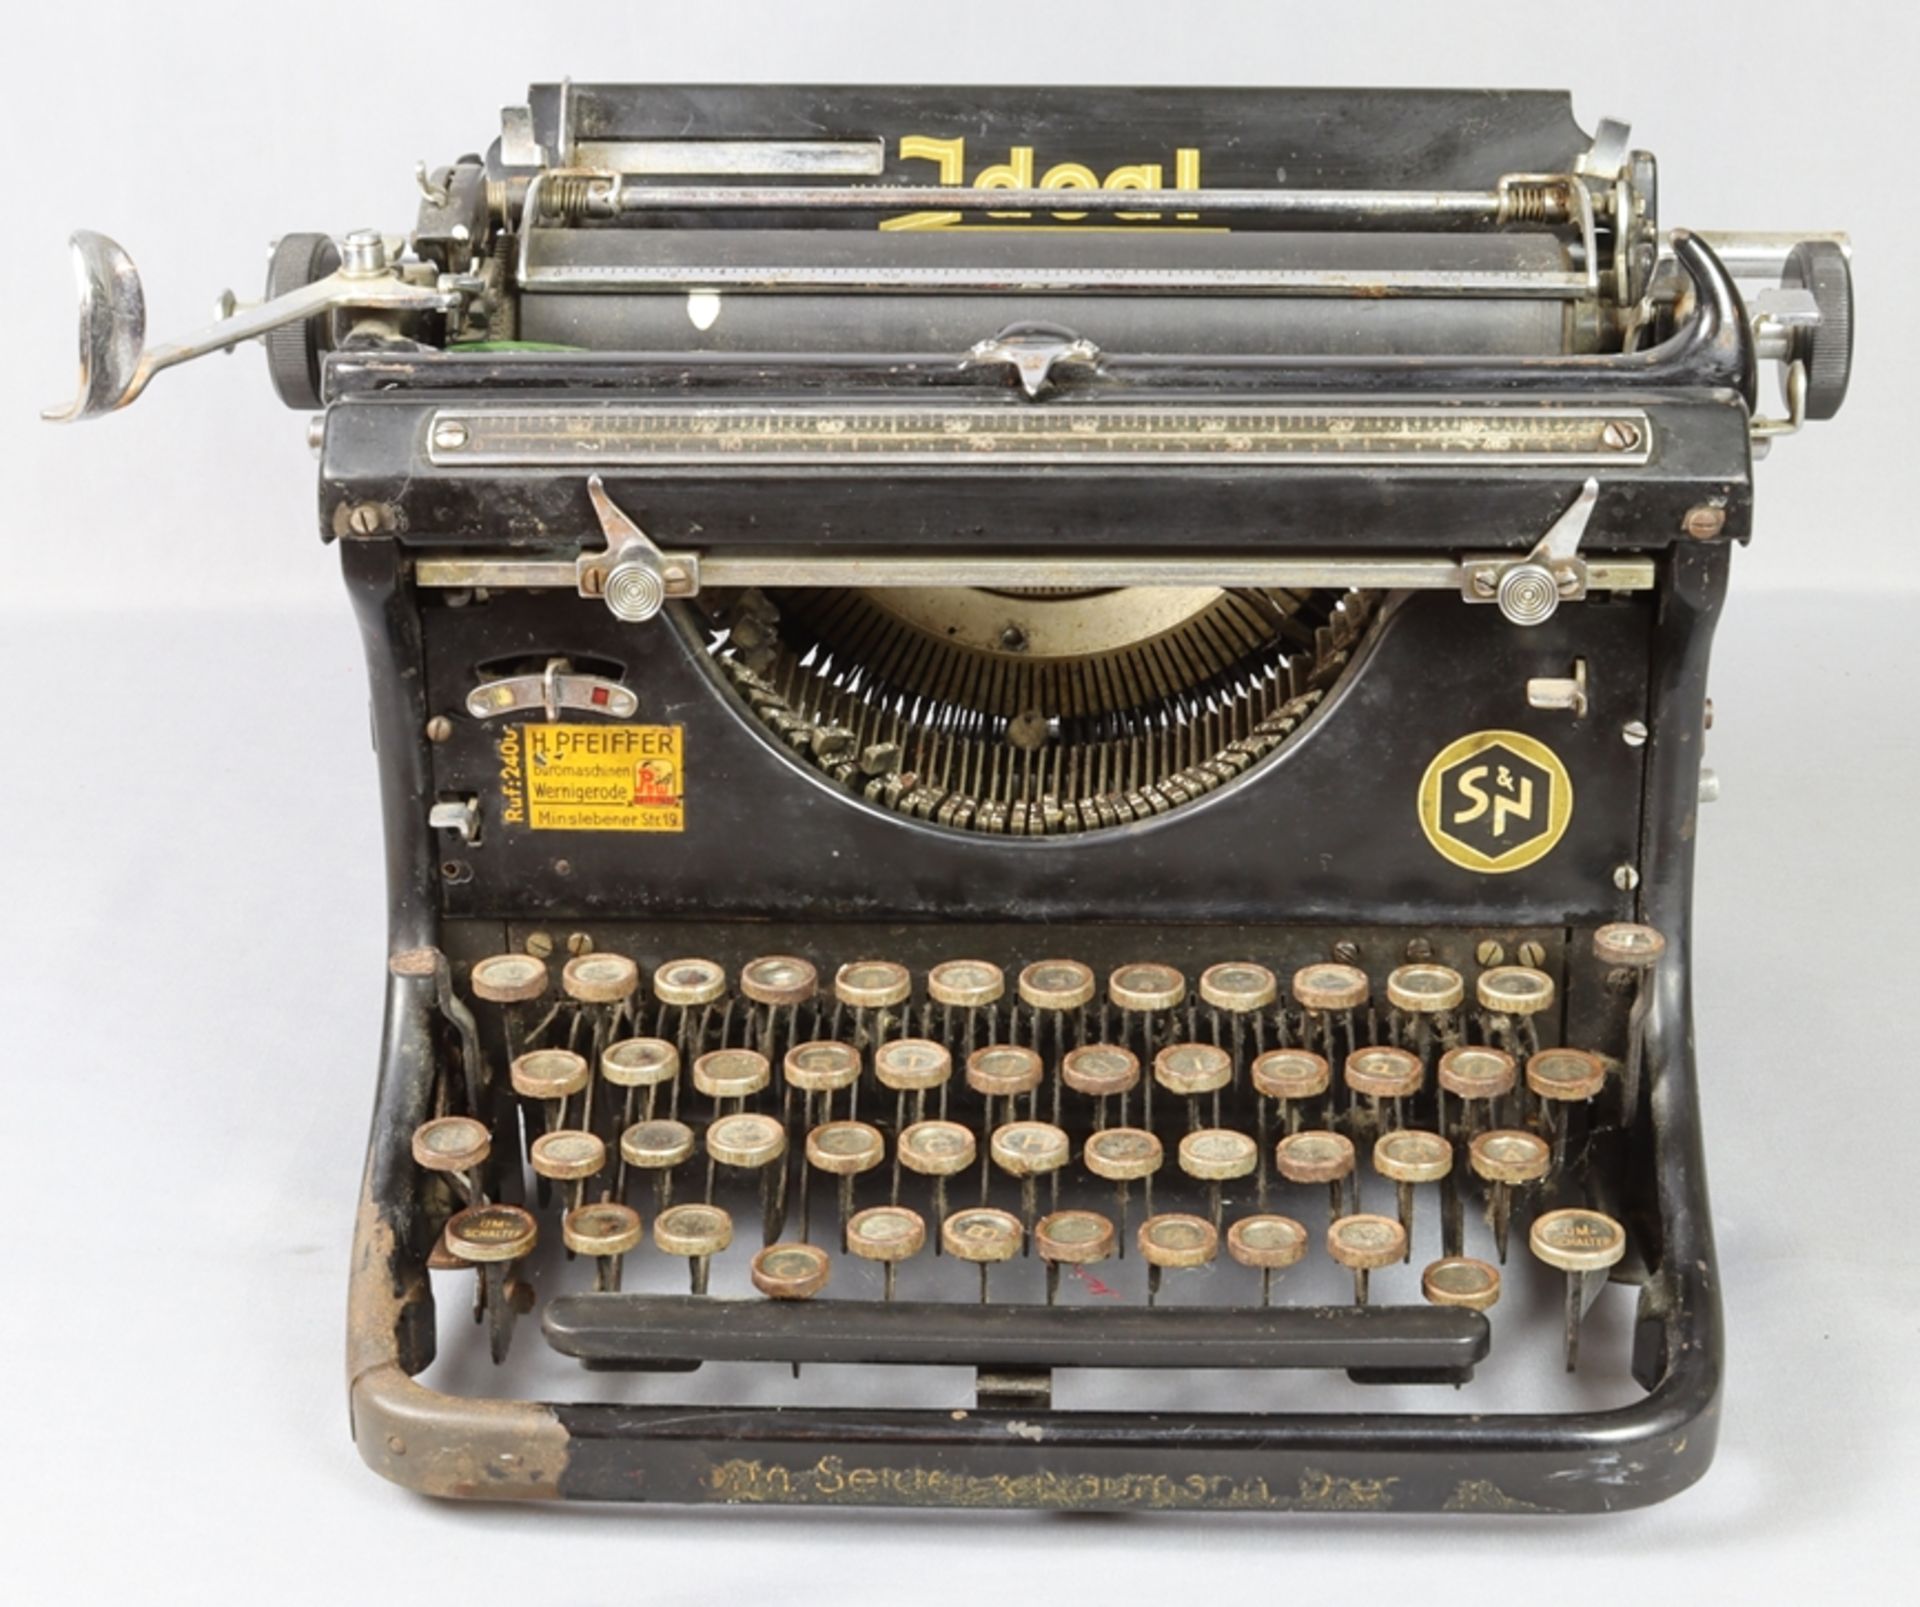 Typewriter "Ideal", 20s-30s of the 20th century, German